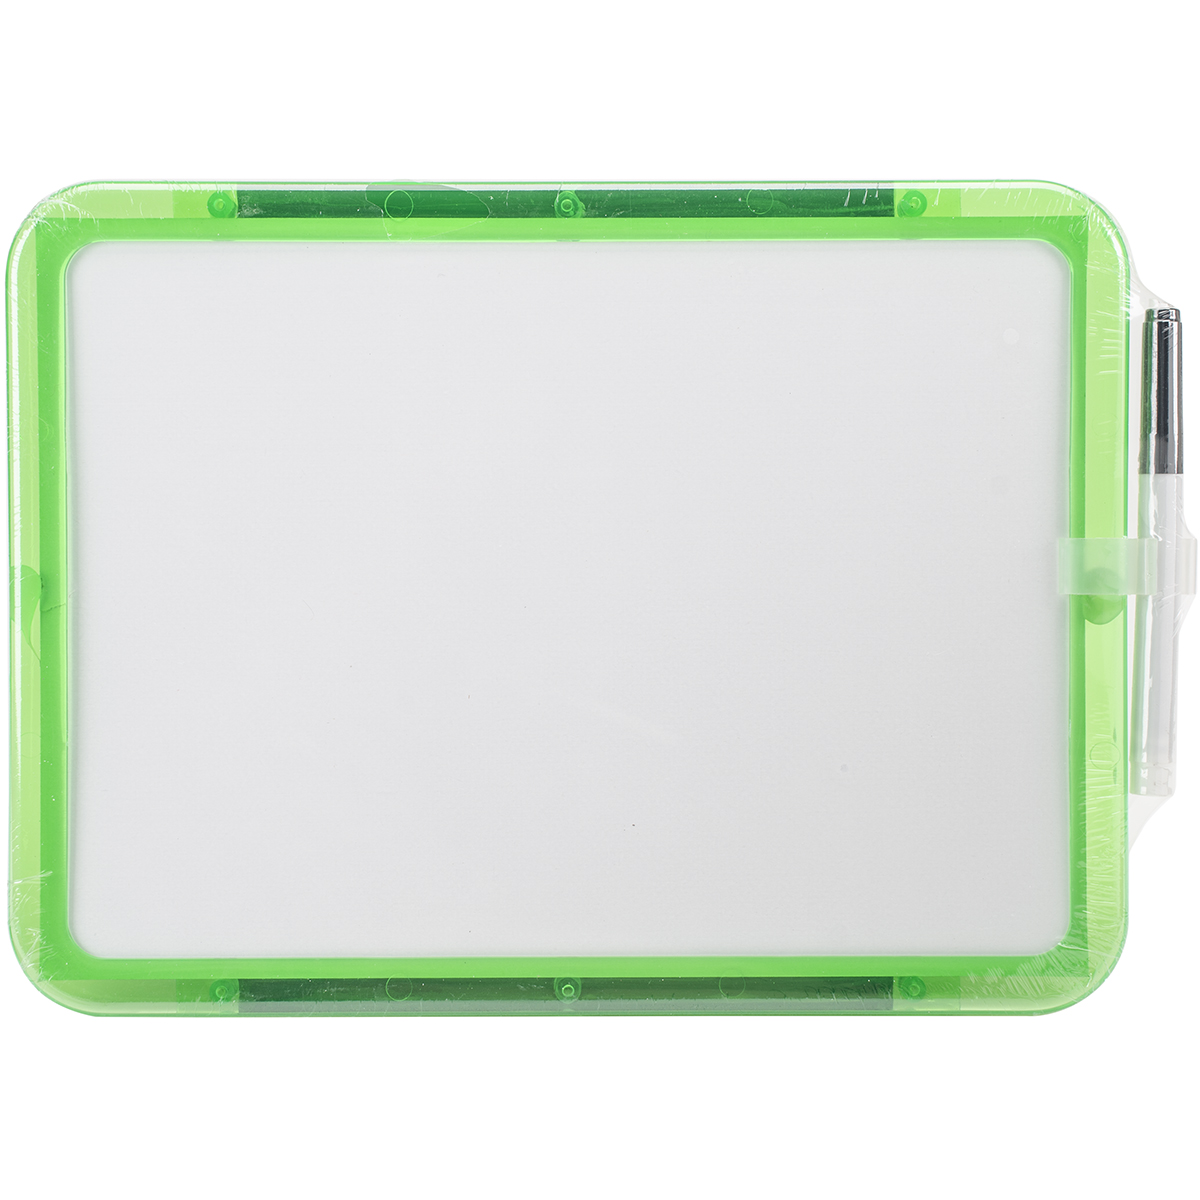 1095-24 11.4 X 8.5 In. Dry Erase Board With Marker